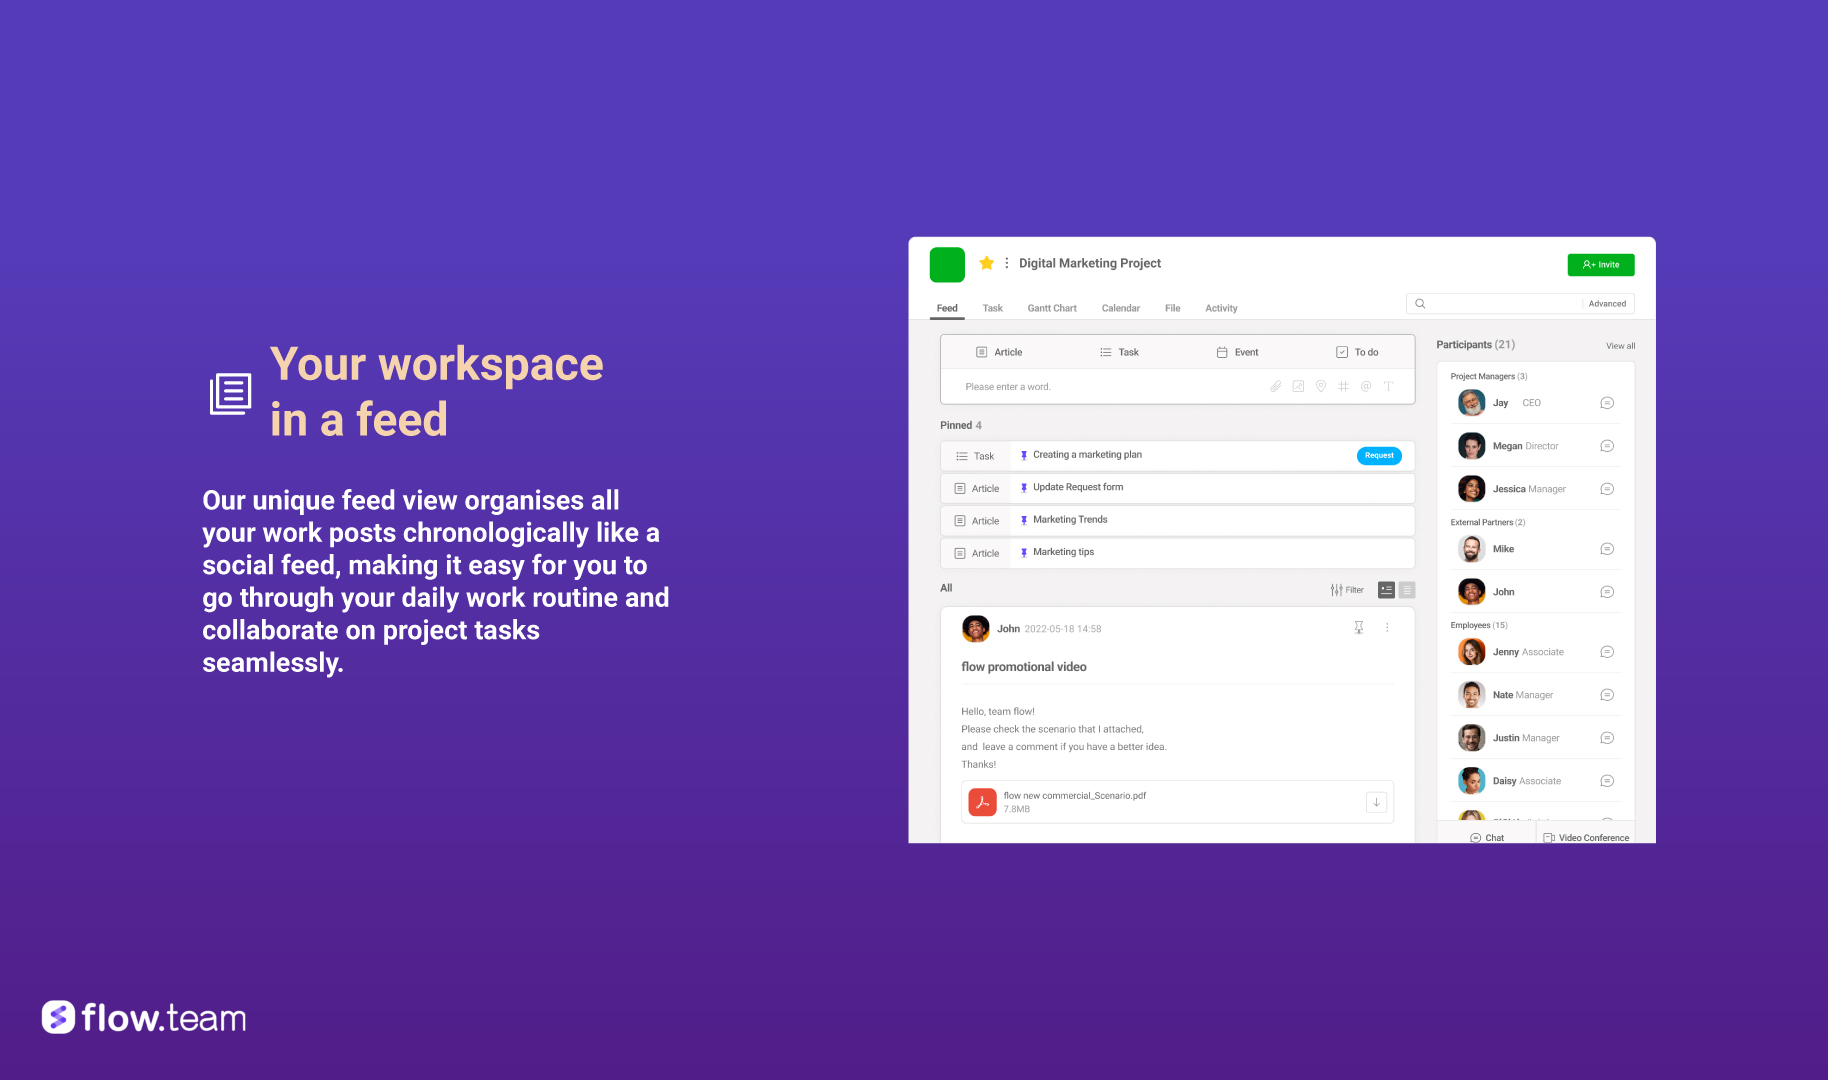 Your workspace in a feed